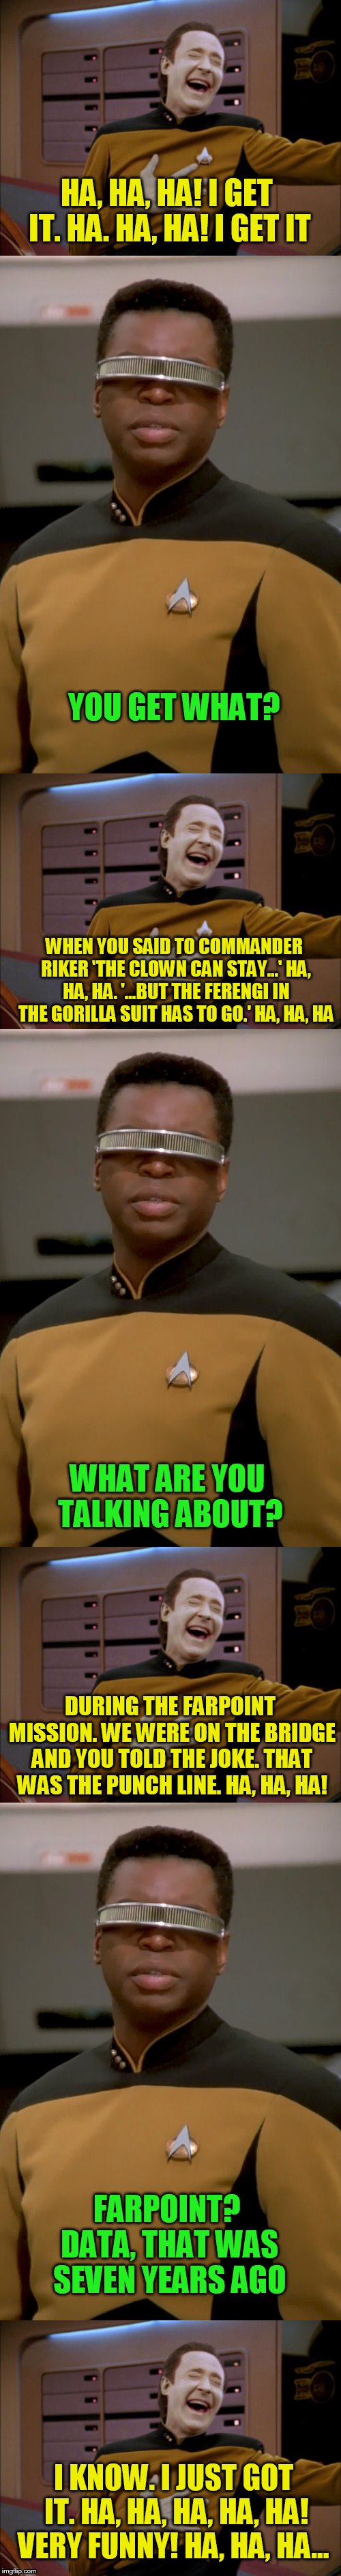 HA, HA, HA! I GET IT. HA. HA, HA! I GET IT I KNOW. I JUST GOT IT. HA, HA, HA, HA, HA! VERY FUNNY! HA, HA, HA... YOU GET WHAT? WHEN YOU SAID  | image tagged in laughing data,georgi laforge | made w/ Imgflip meme maker